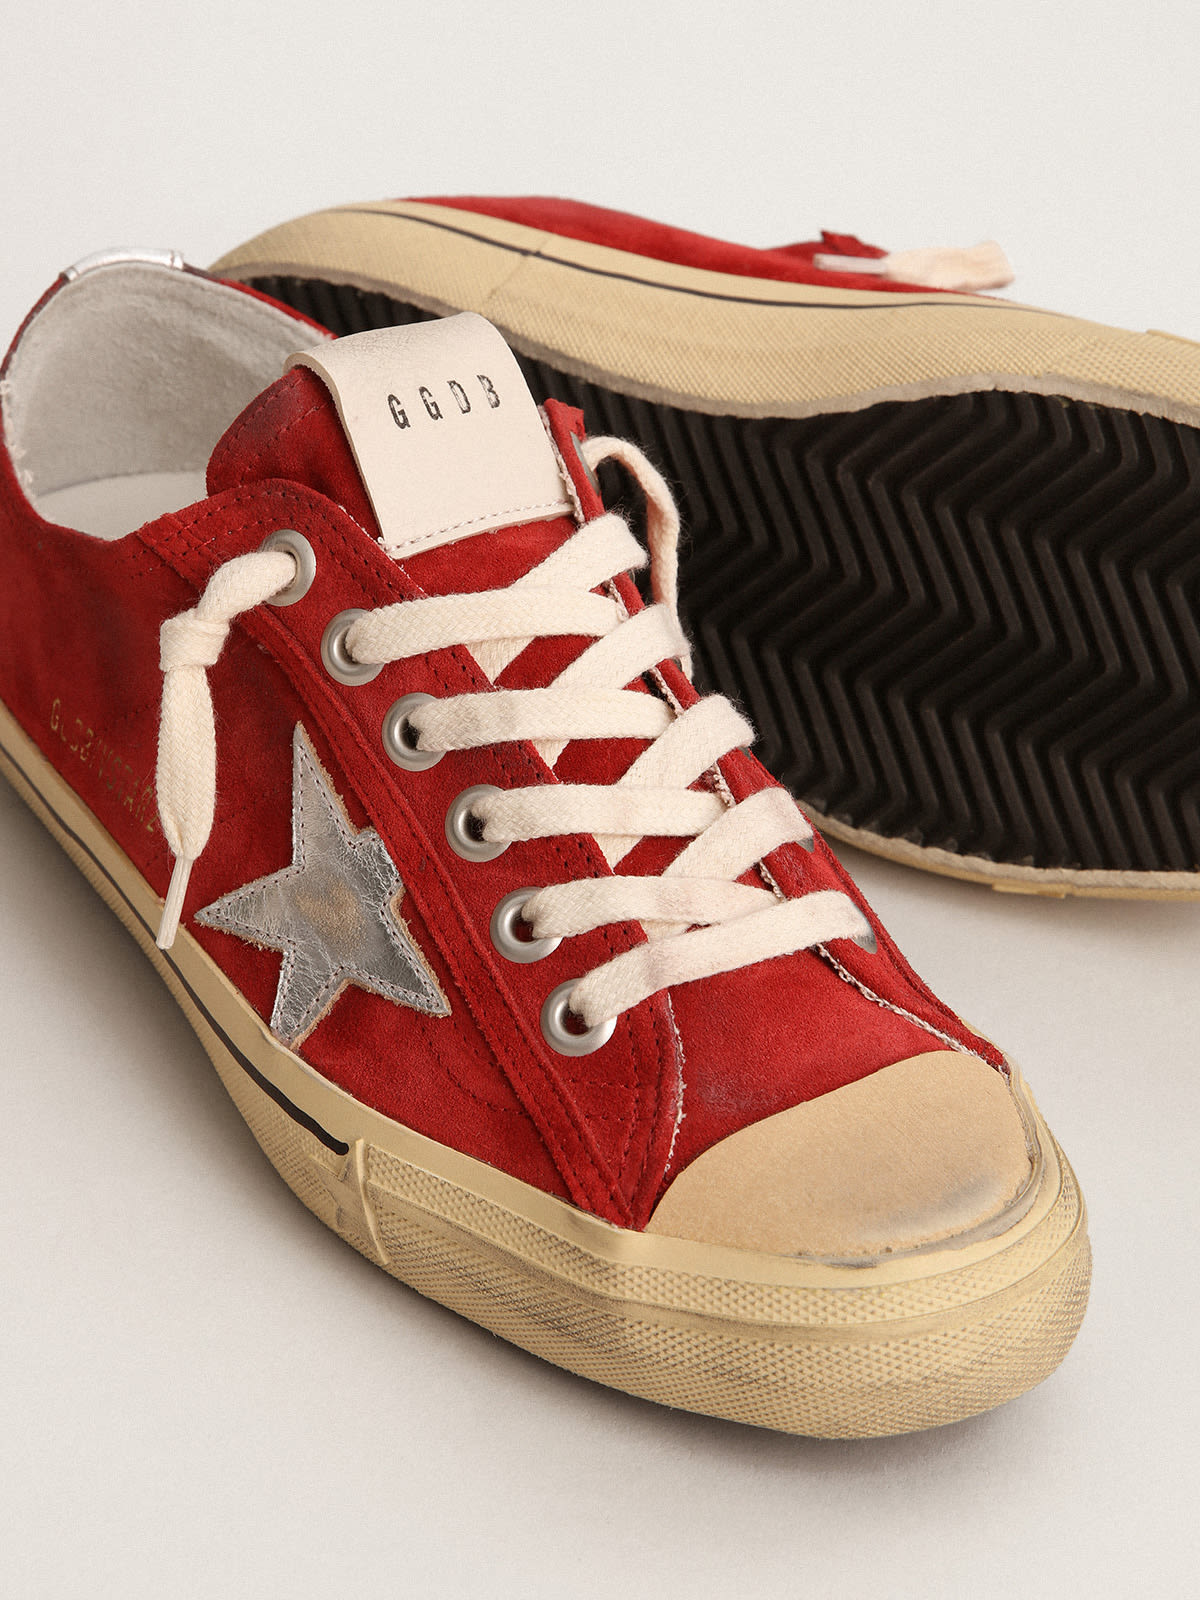 Golden Goose - V-Star LTD sneakers in dark red suede with silver metallic leather star in 